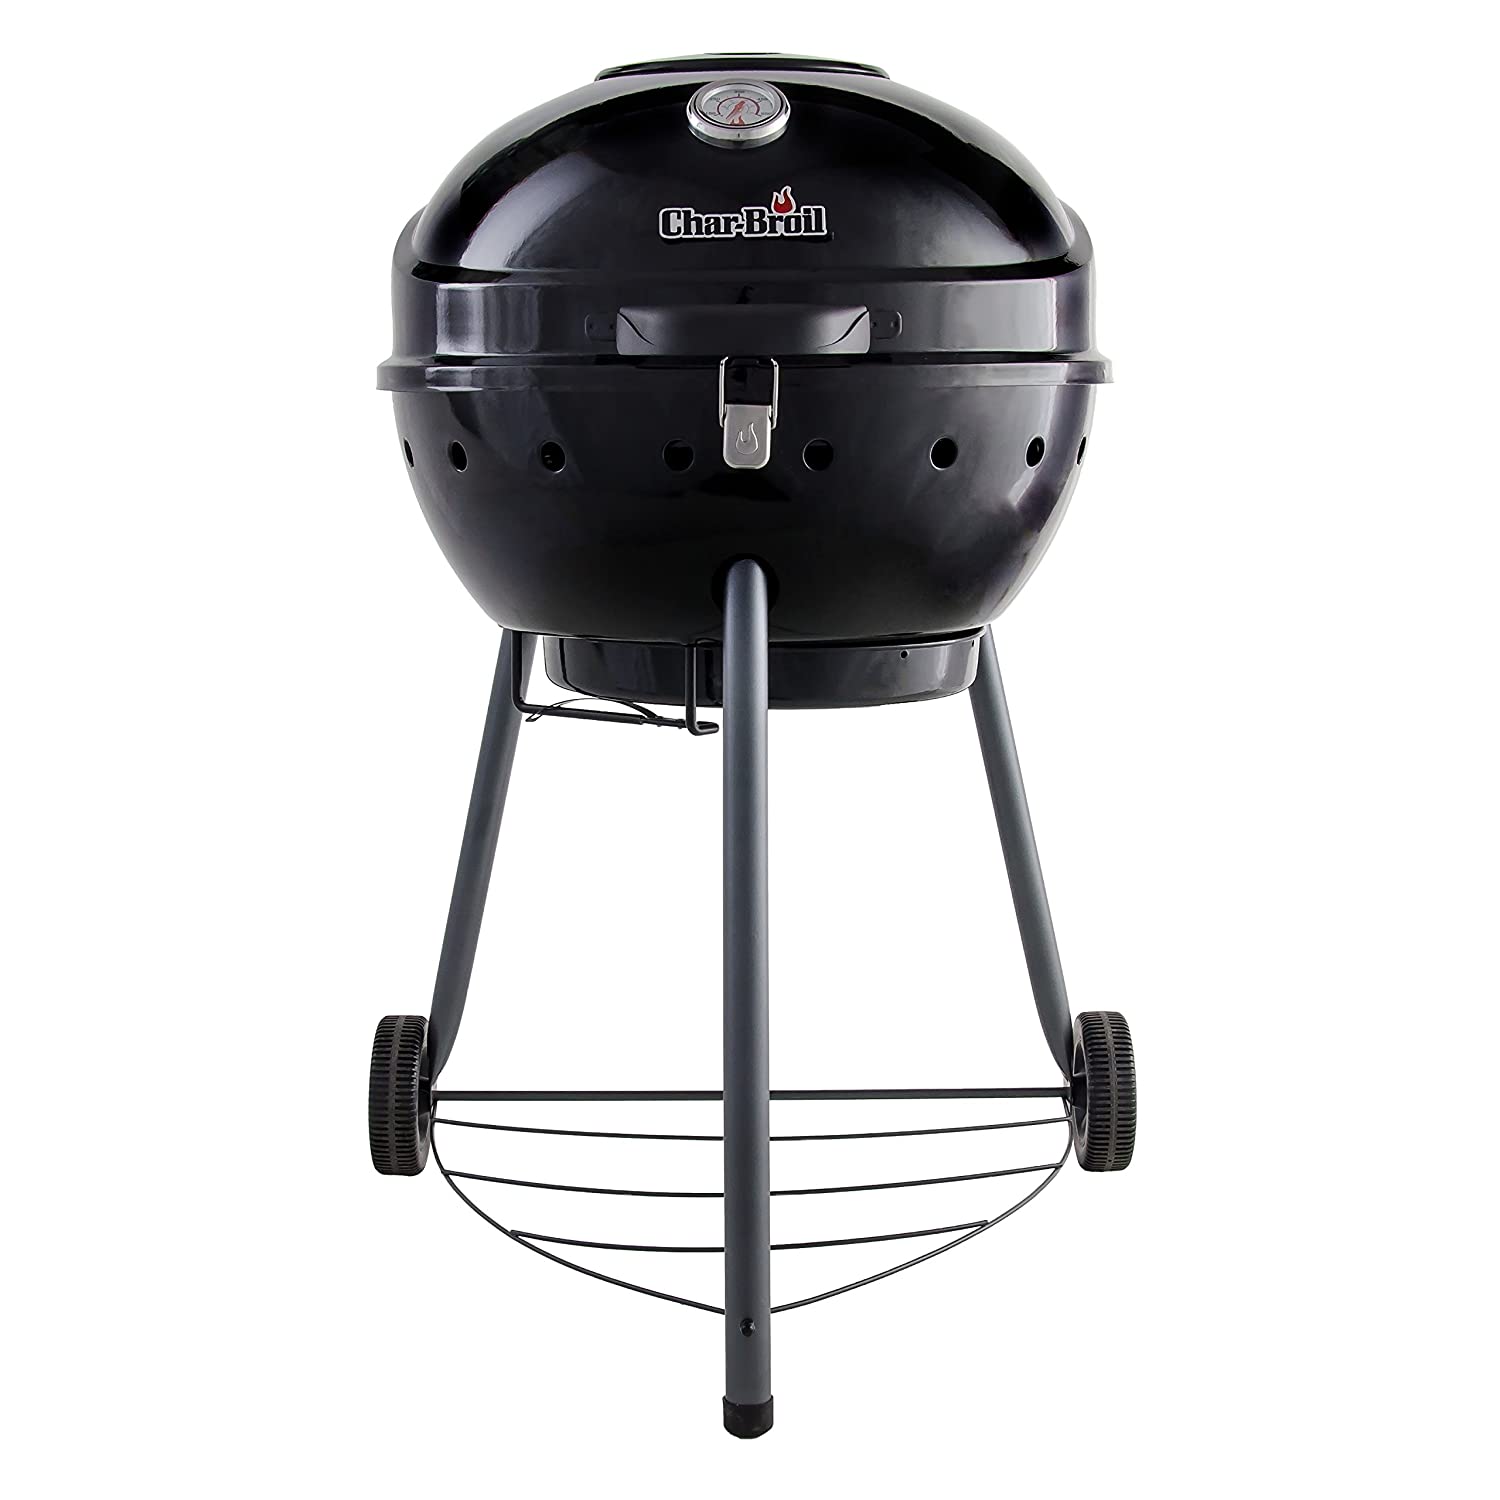 Char-Broil Performance Best Charcoal Grill